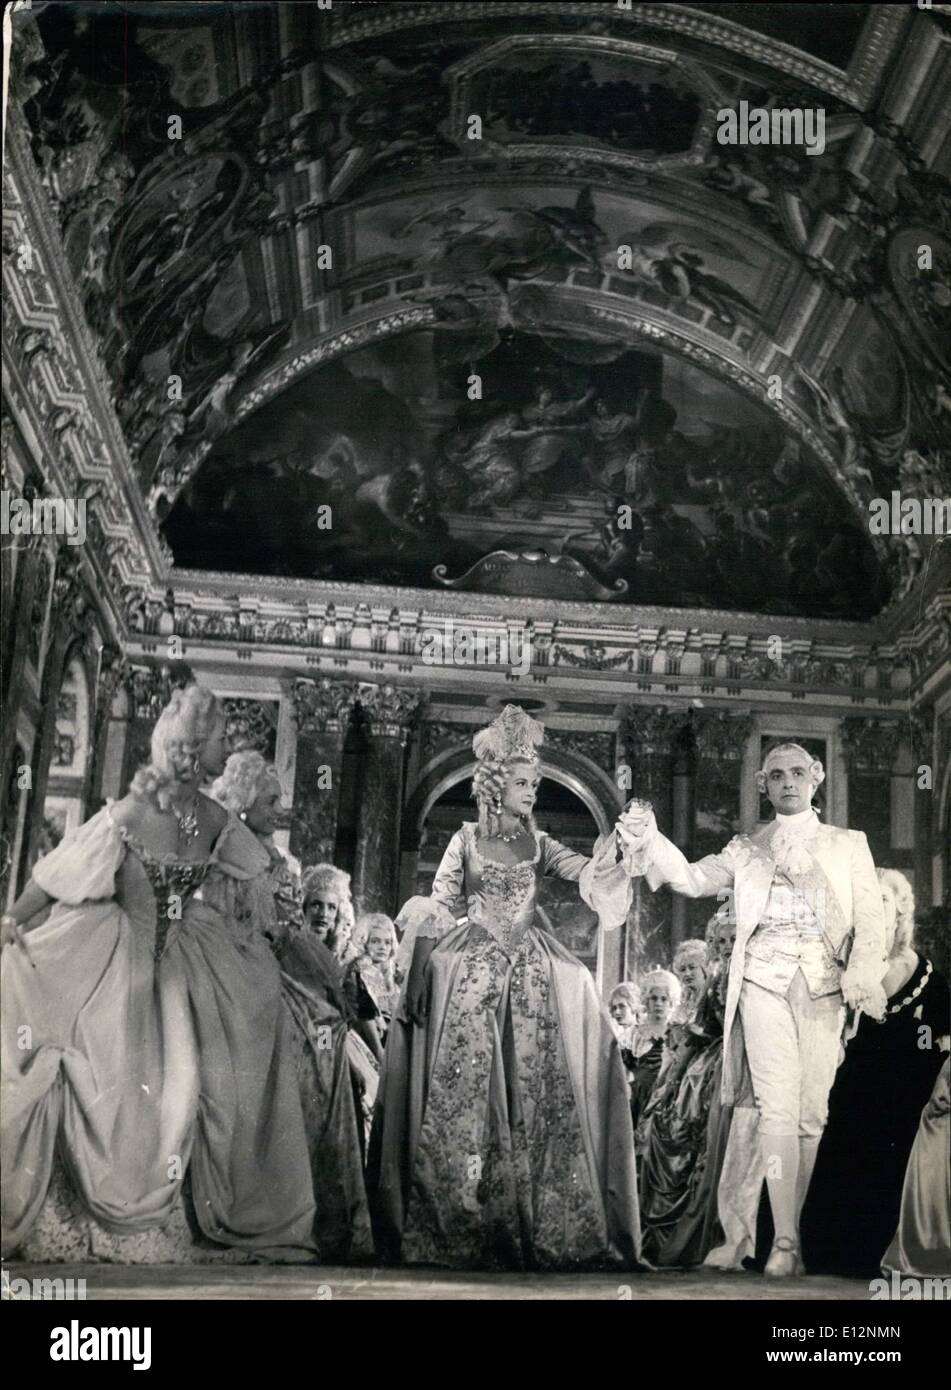 Feb. 24, 2012 - Sacha Guitry revives Versailles history. A scene of the new film produced by Sacha Guitry evoking the glorious history of Versailles. Louis XVI (Gilbert Boka) and Marie Antoinette (Lama Marconi) are seen here in the gorgeous surroundings of the hall mirrors. July 20/53 Stock Photo